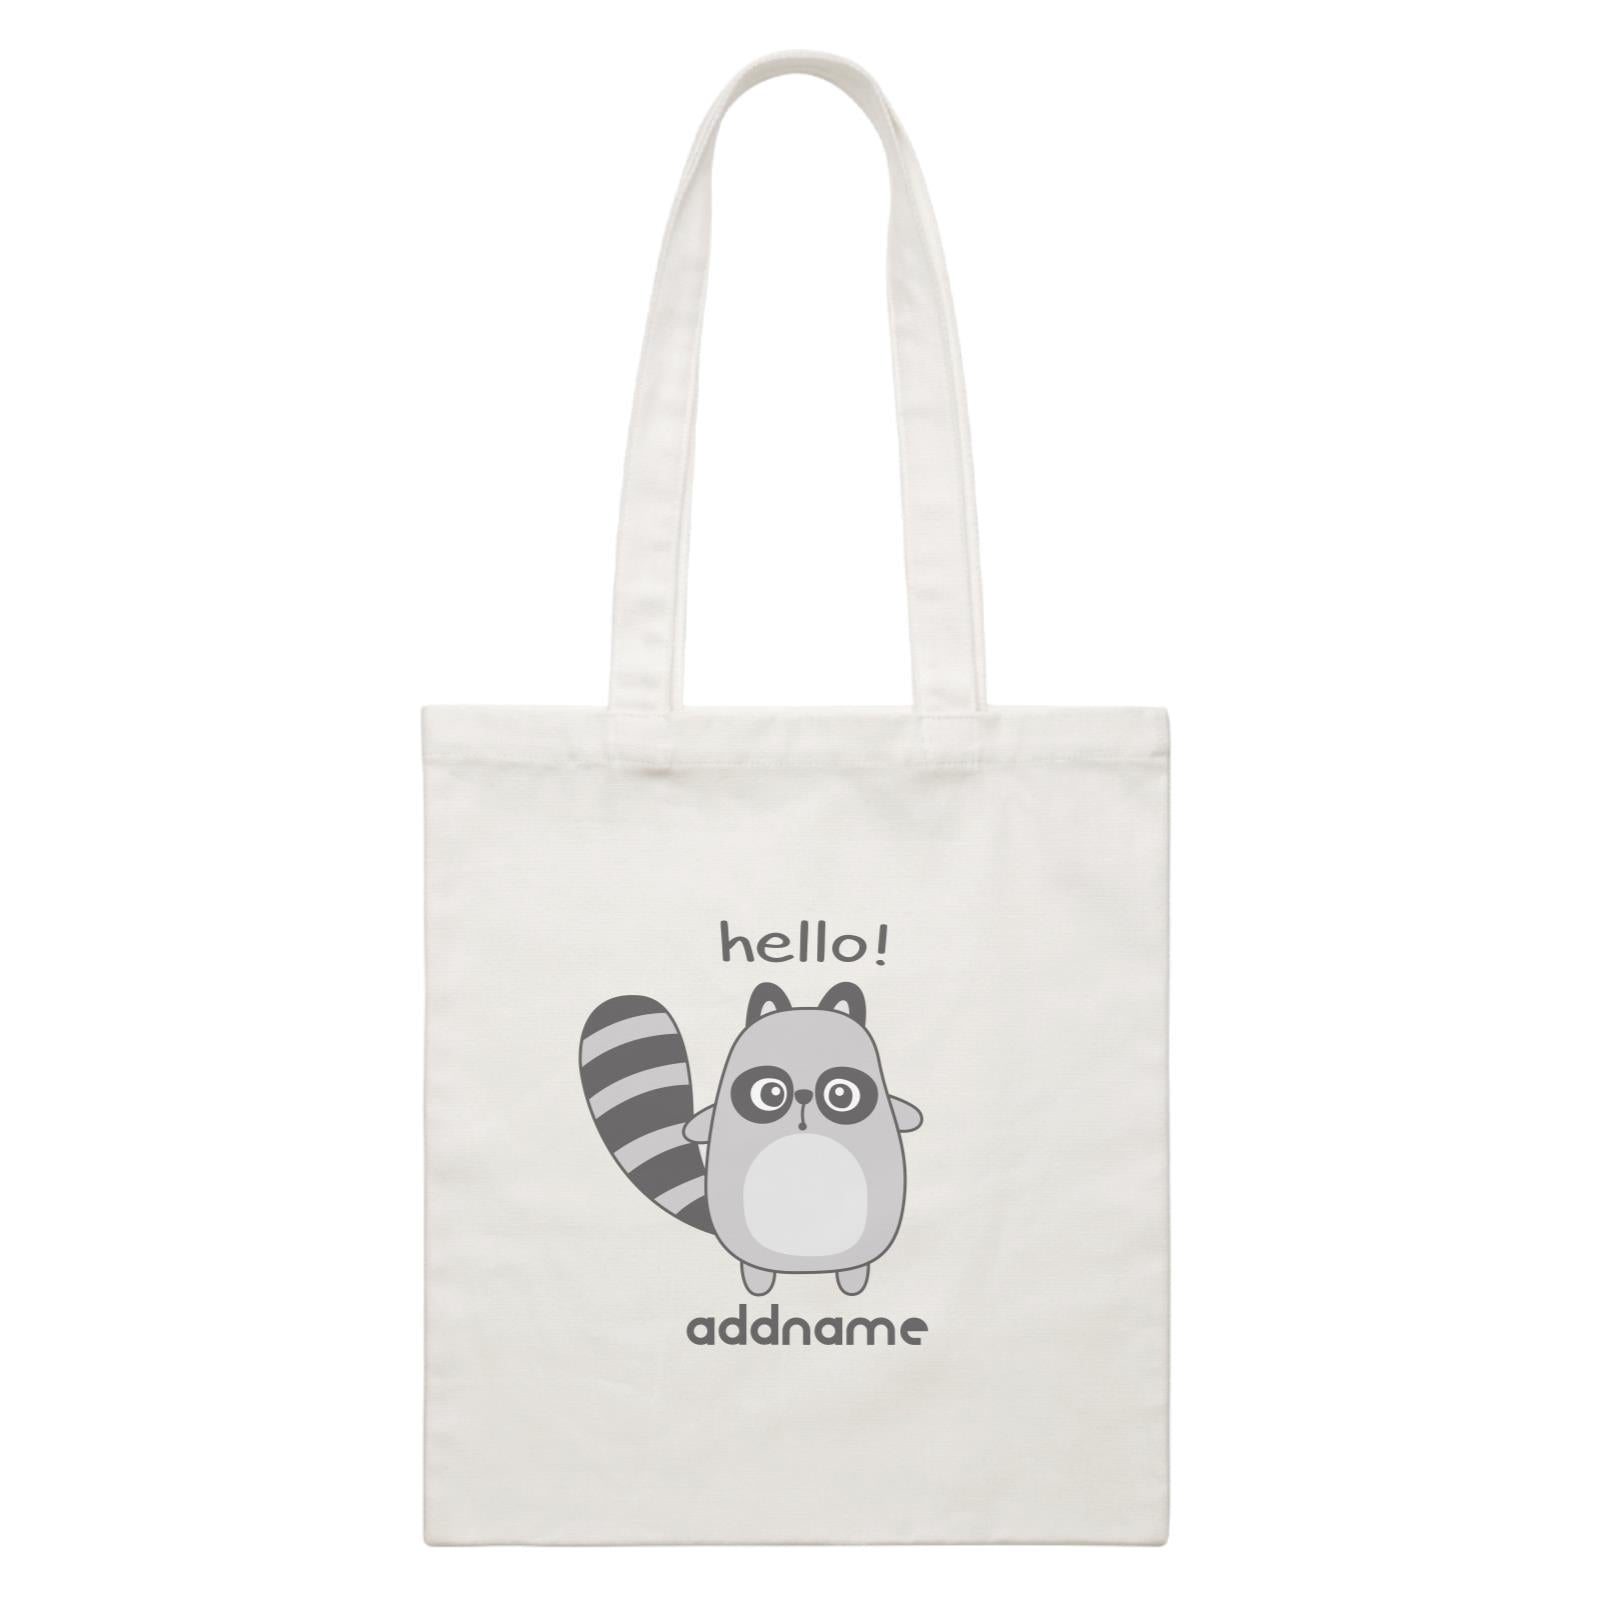 Cool Cute Animals Racoon Hello Addname White Canvas Bag